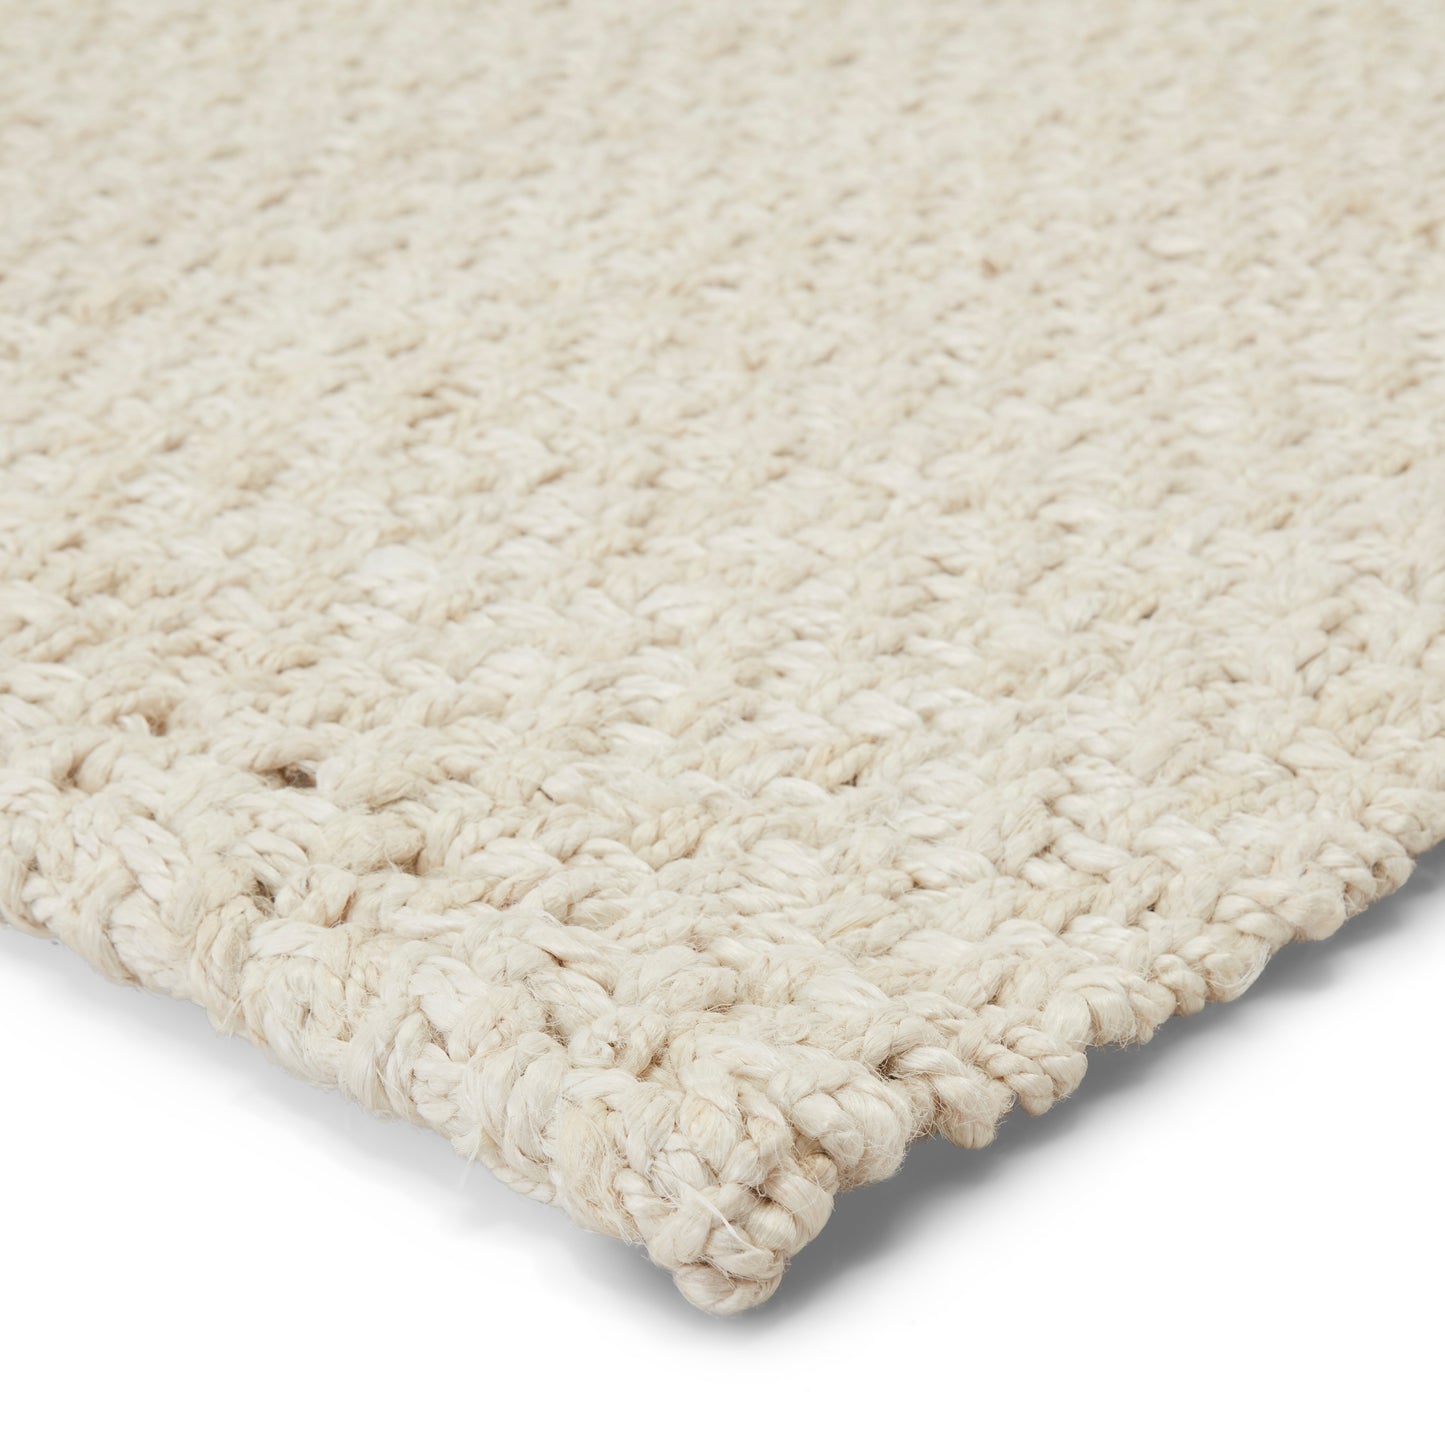 Naturals Tobago Tracie Handmade Jute Indoor Area Rug From Jaipur Living